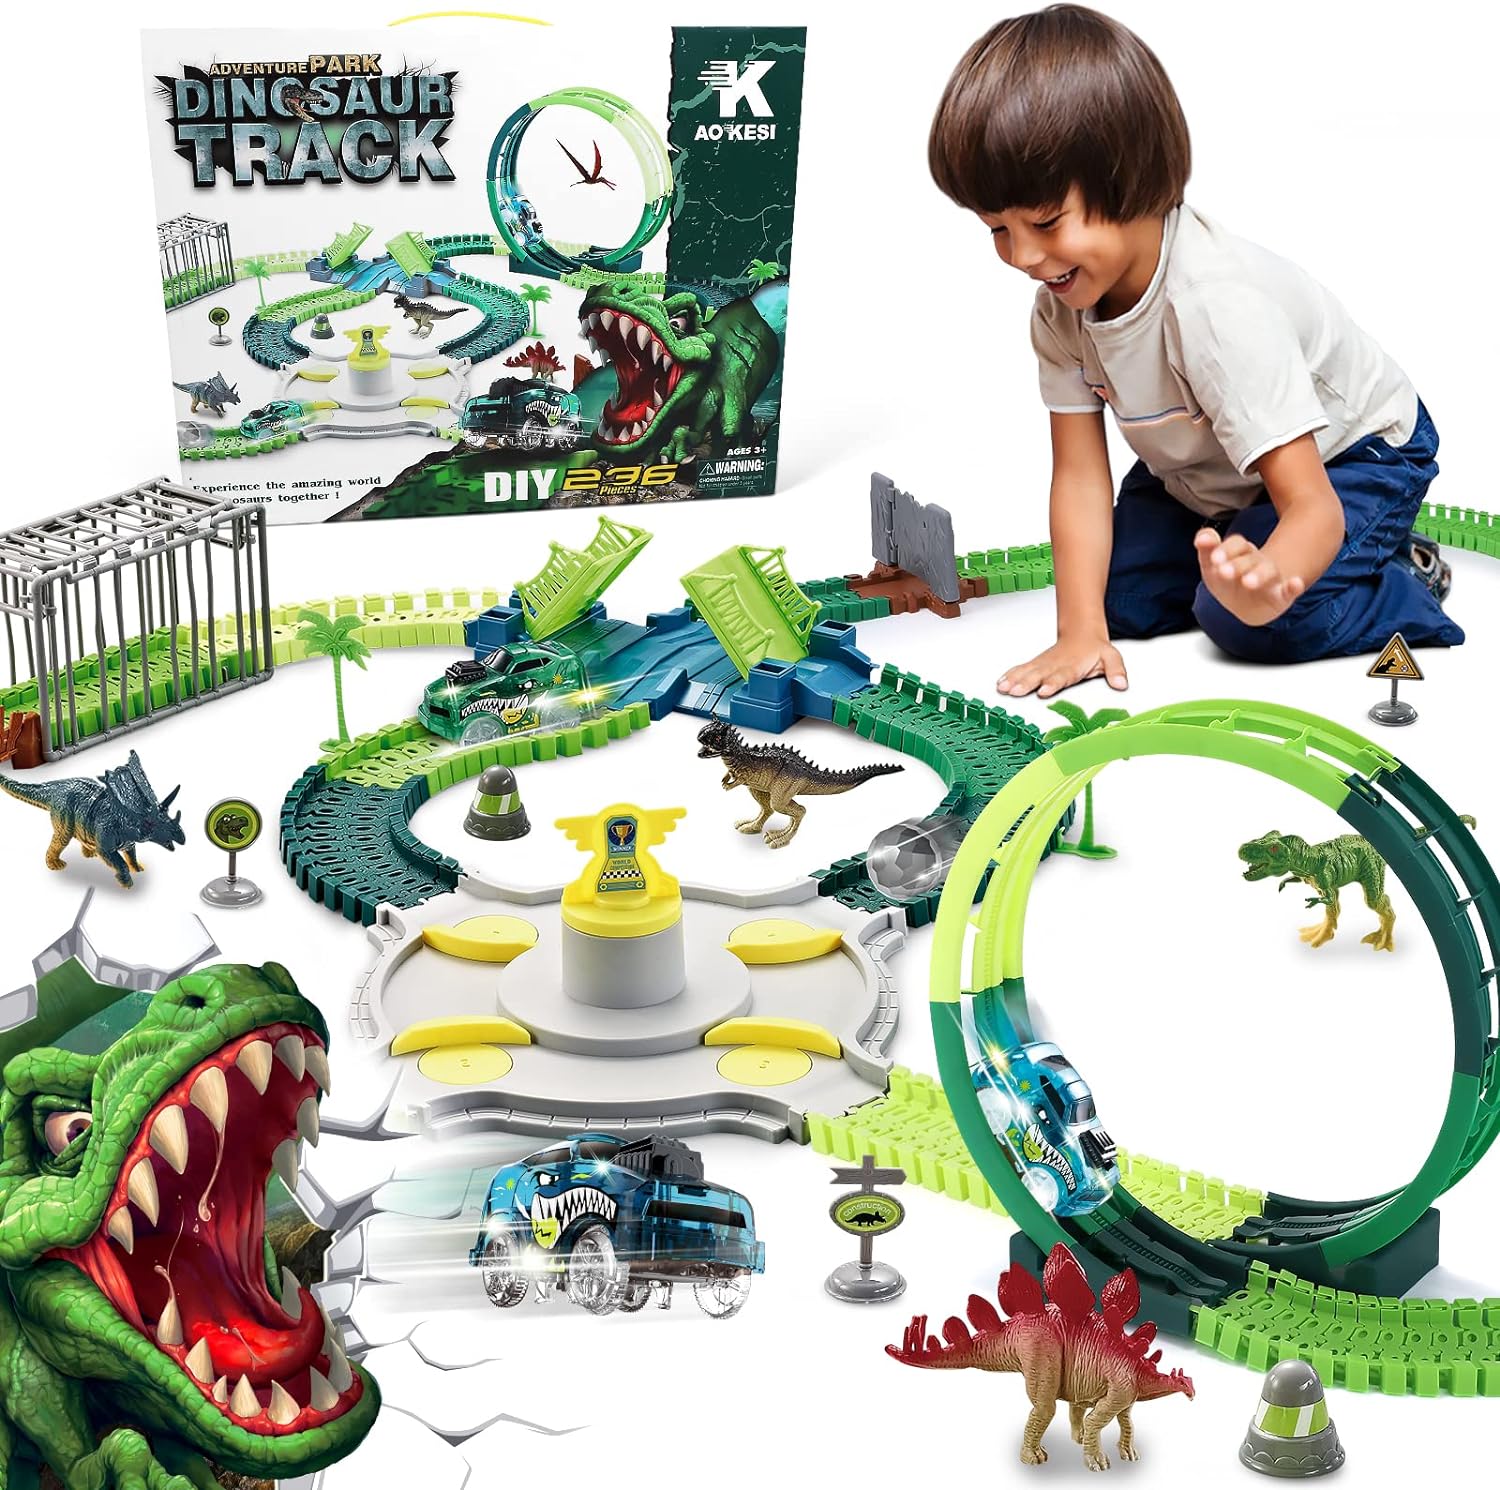 236 PCS Dinosaur Toys Race Track, Create a Dinosaur World Road,Flexible 360 Train Tracks Playset with Turntable Playset, Christmas Birthday Gifts for 3 4 5 6 7 Years Old Boys Girls Kids